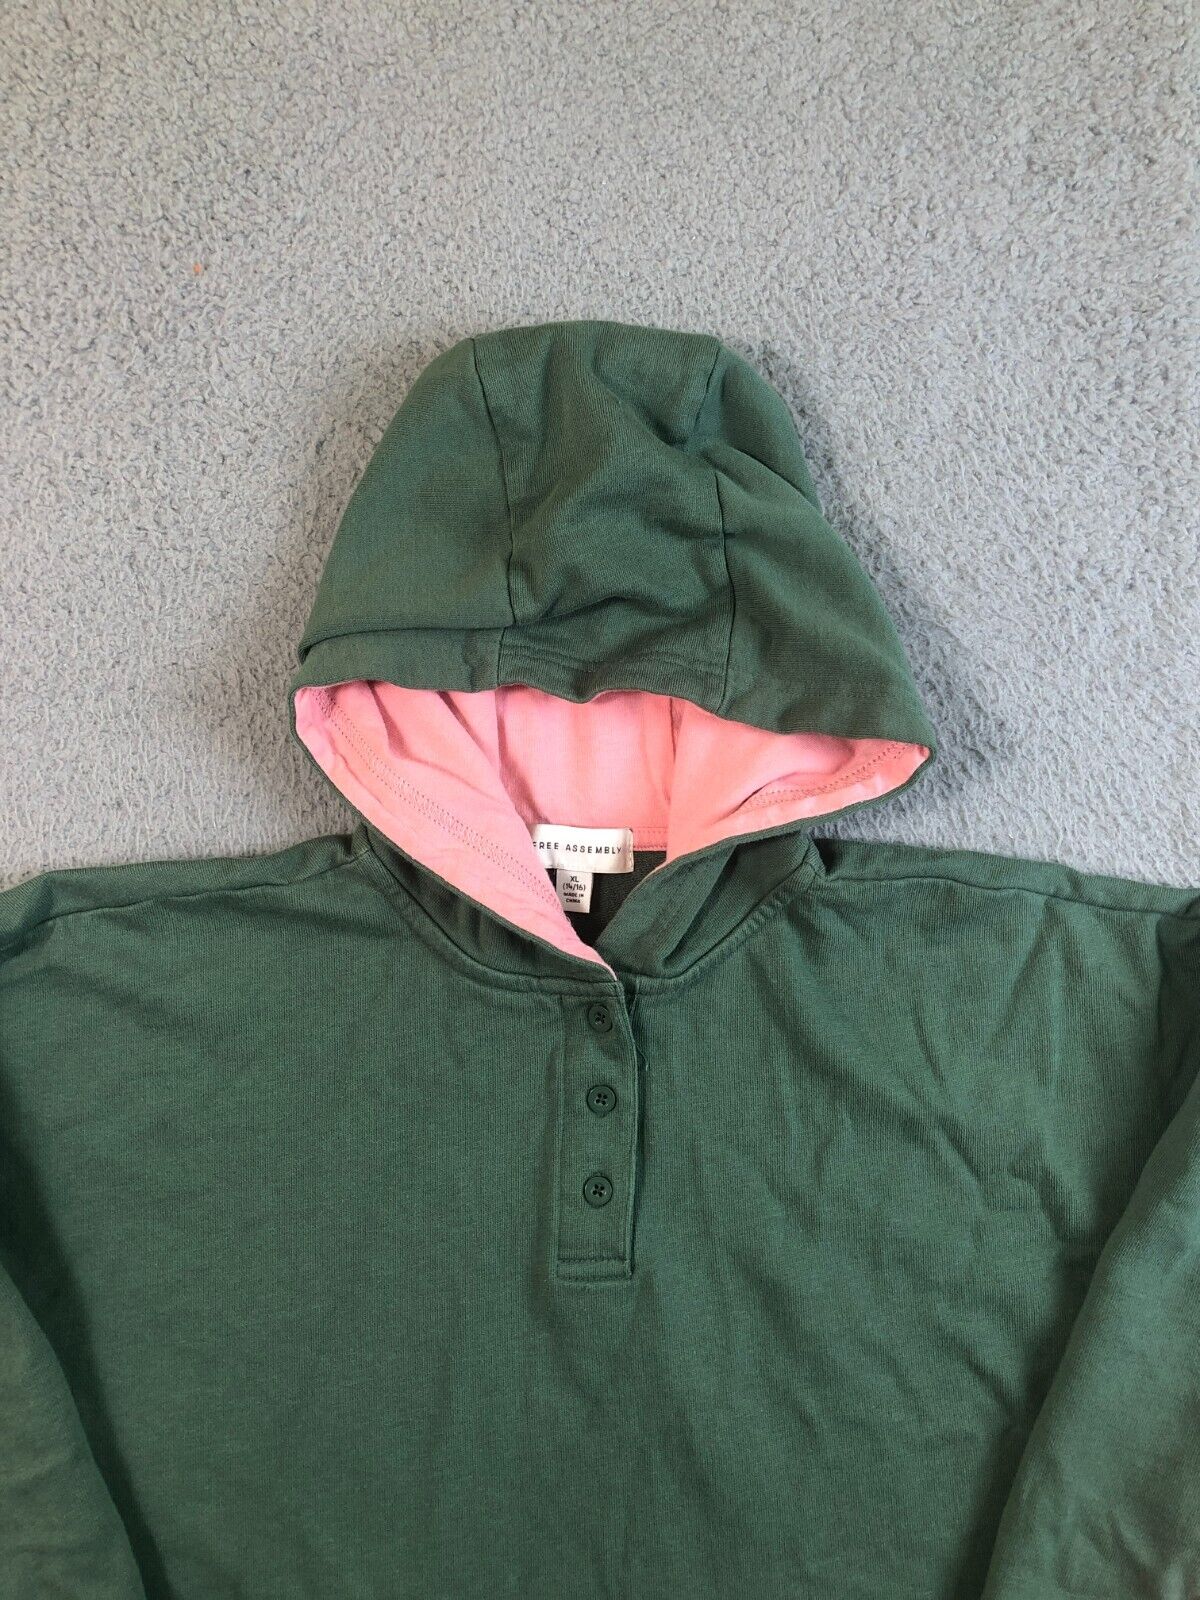 Free Assembly Hoodie Teen XL 14-16 Green Pink 1/4 Button Long Sleeve  Pullover